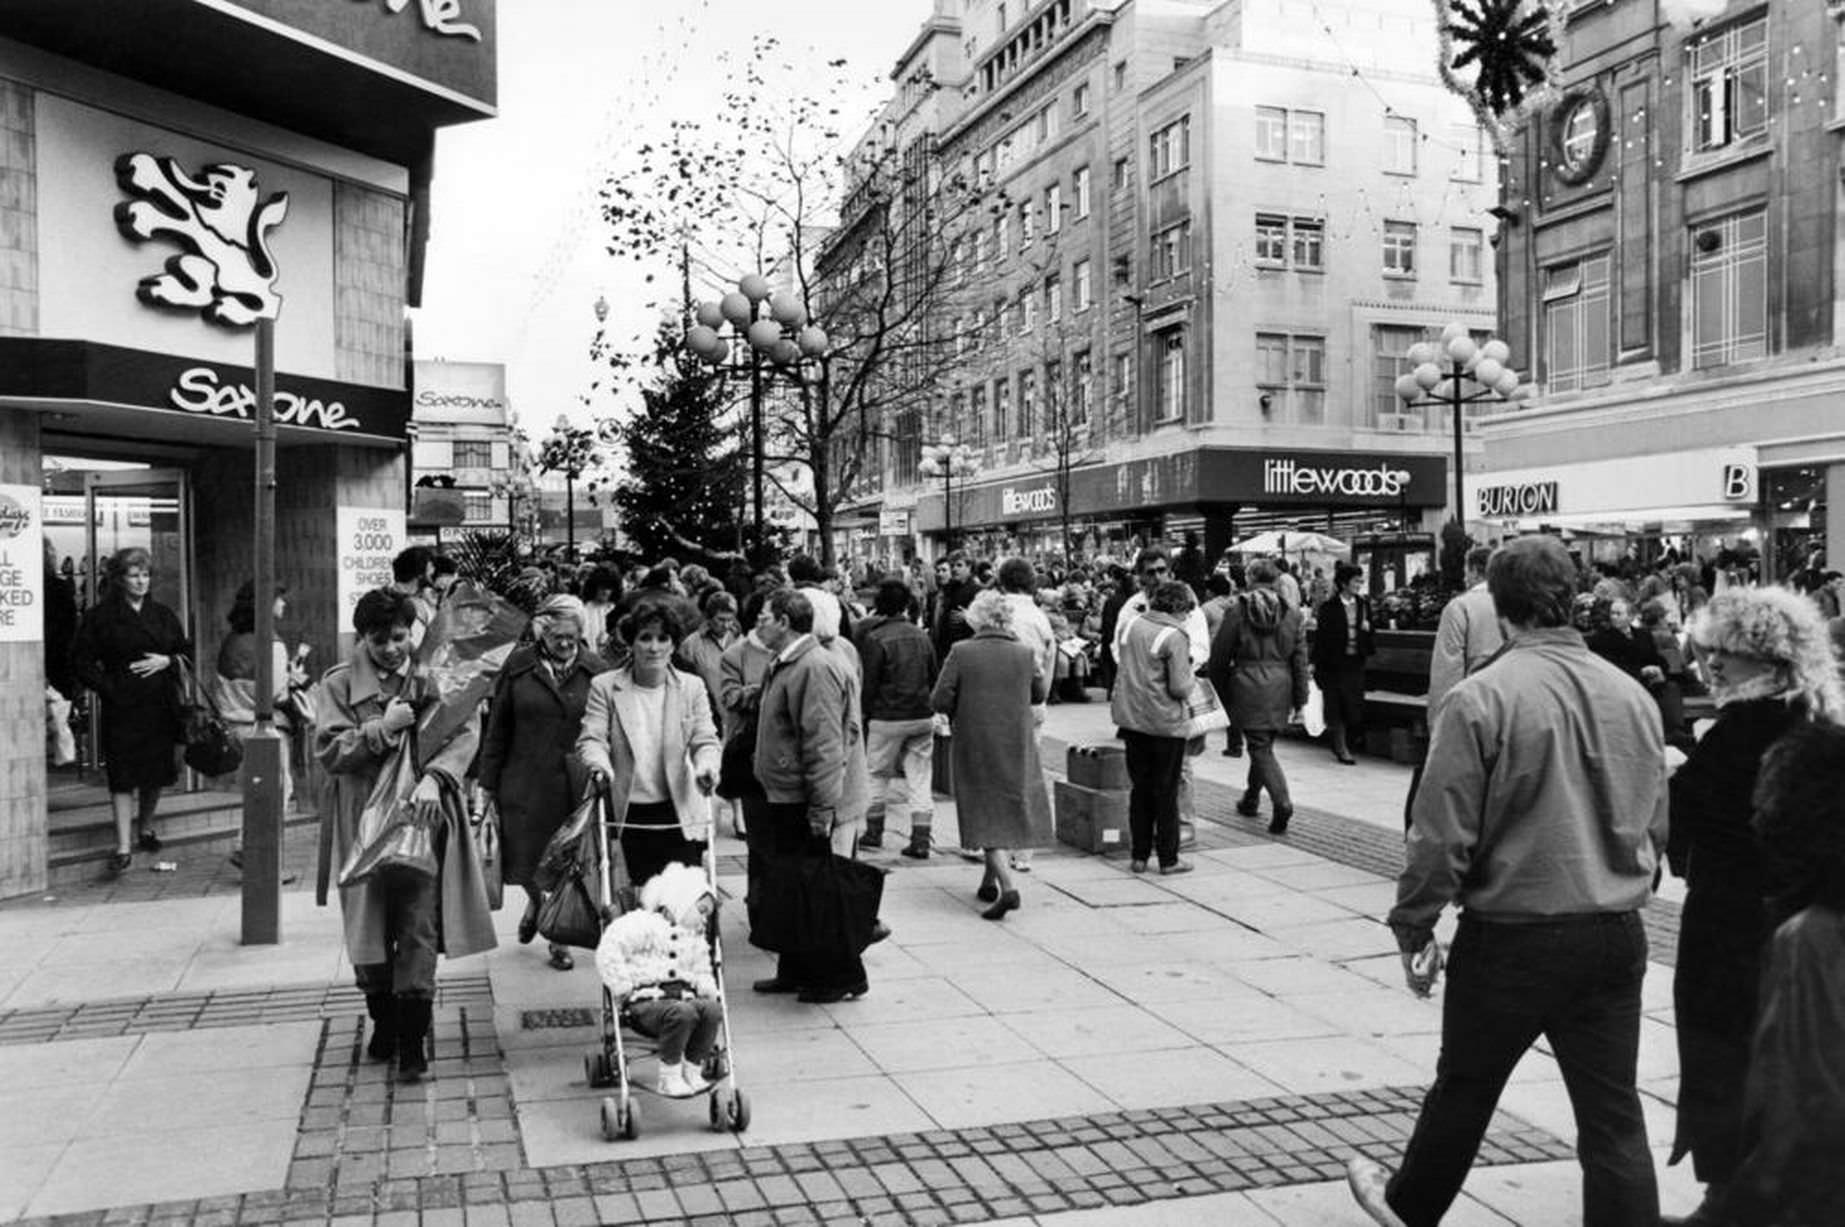 Christmas shoppers on Church Street, one of Liverpool's shopping areas. Church Street, Liverpool, Merseyside, 4th December 1985.